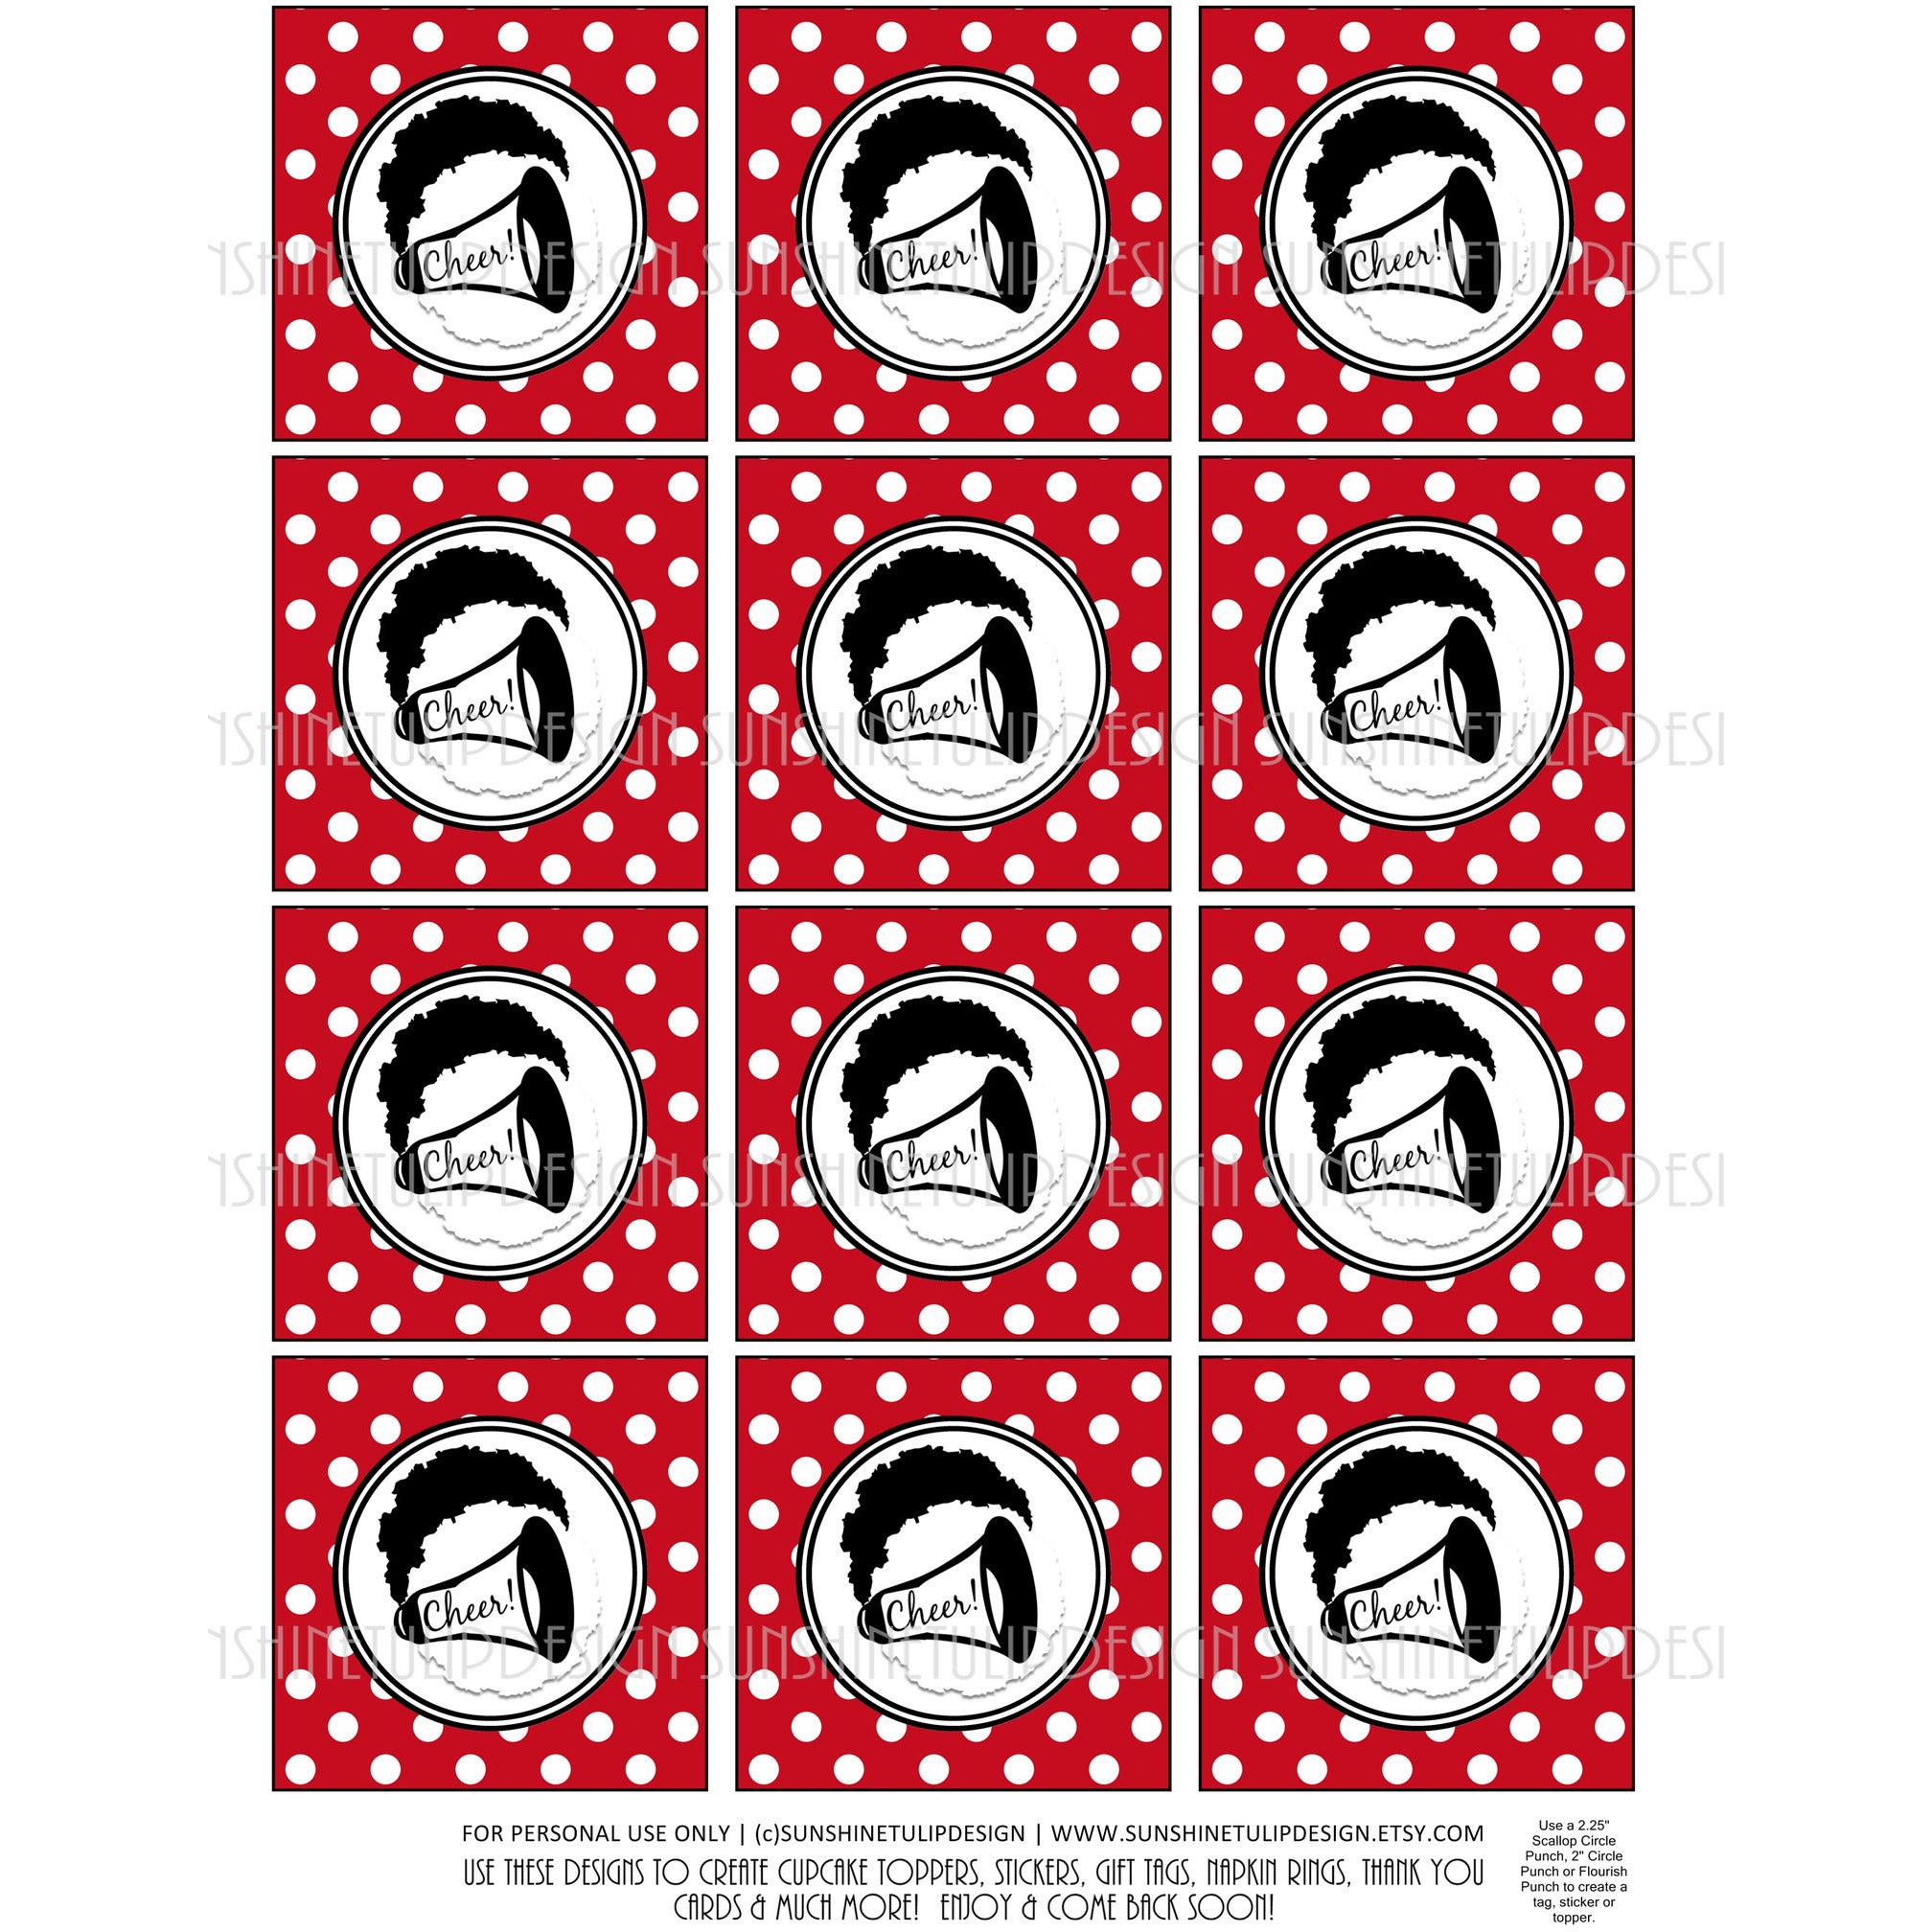 printable-cheer-cupcake-toppers-sticker-labels-gift-tags-by-sunshin